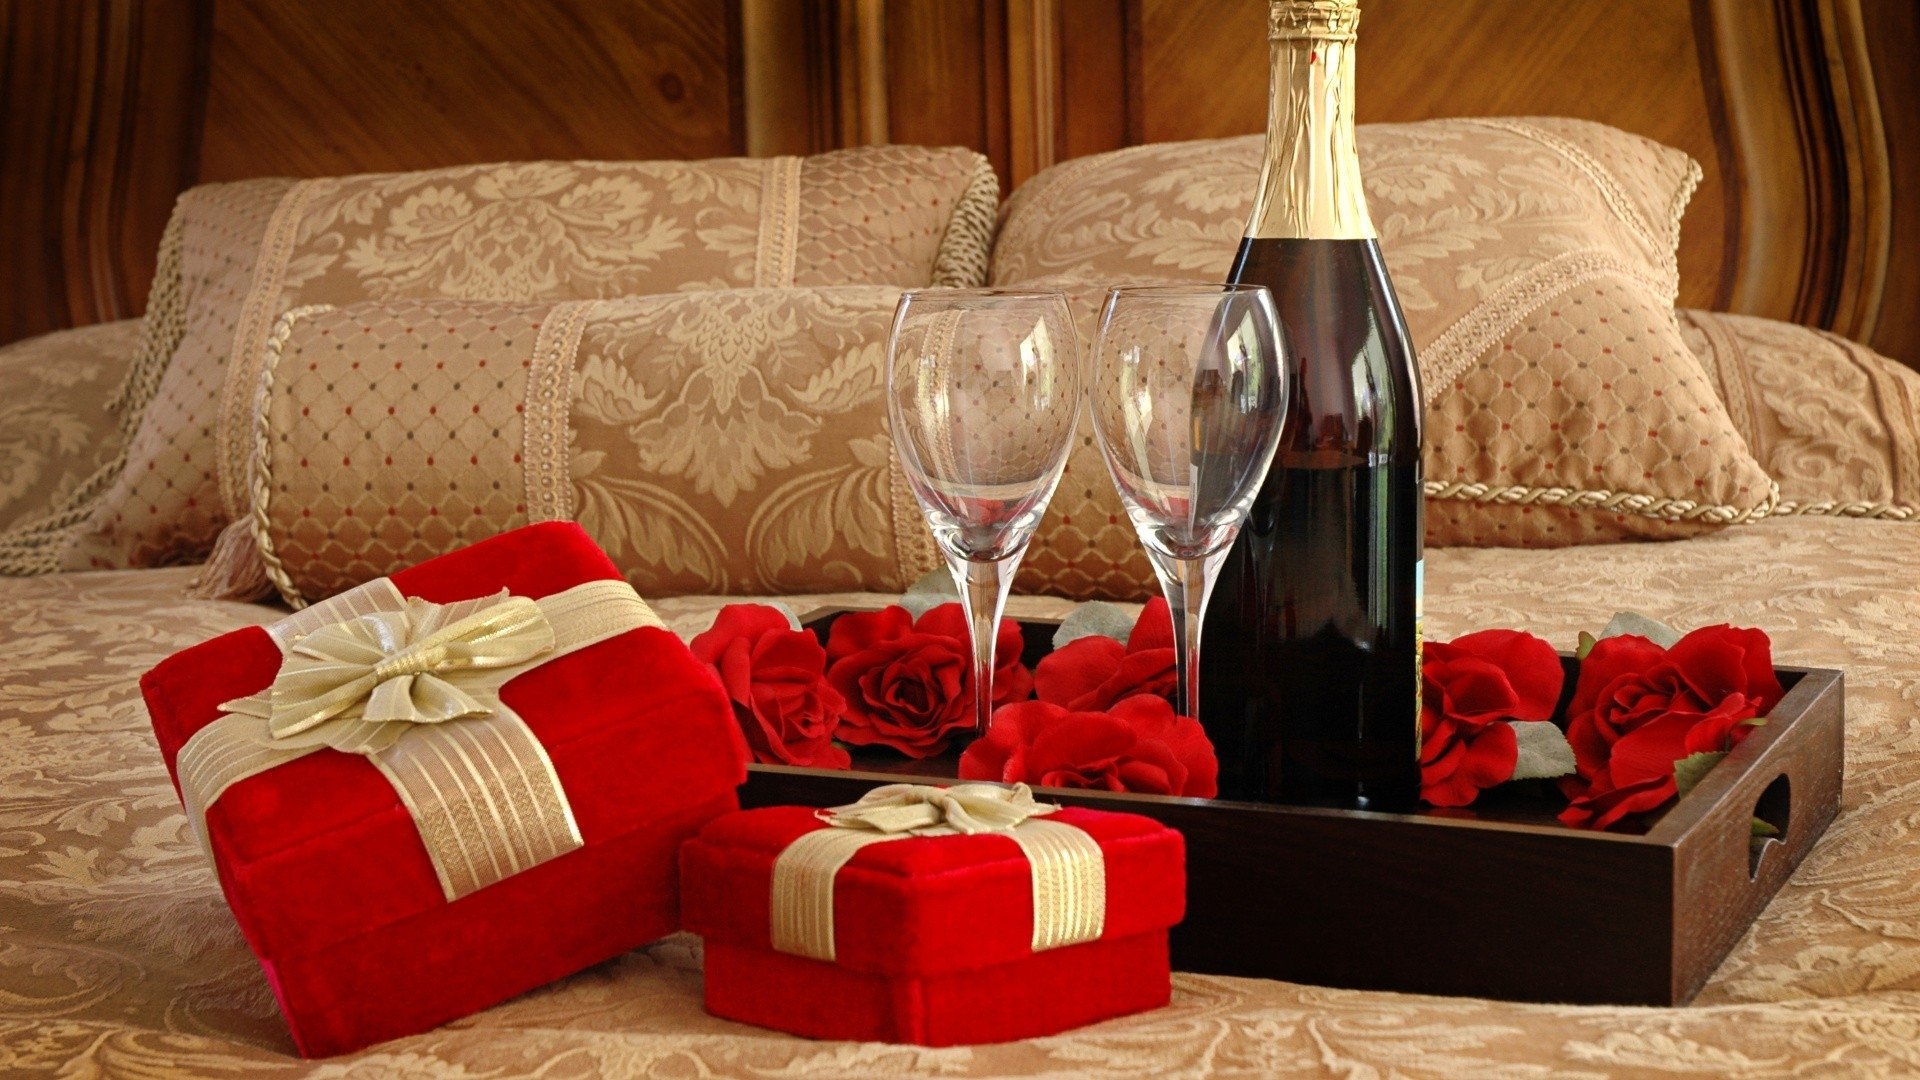 10 Wonderful Romantic Valentines Day Ideas For Him At Home 2021